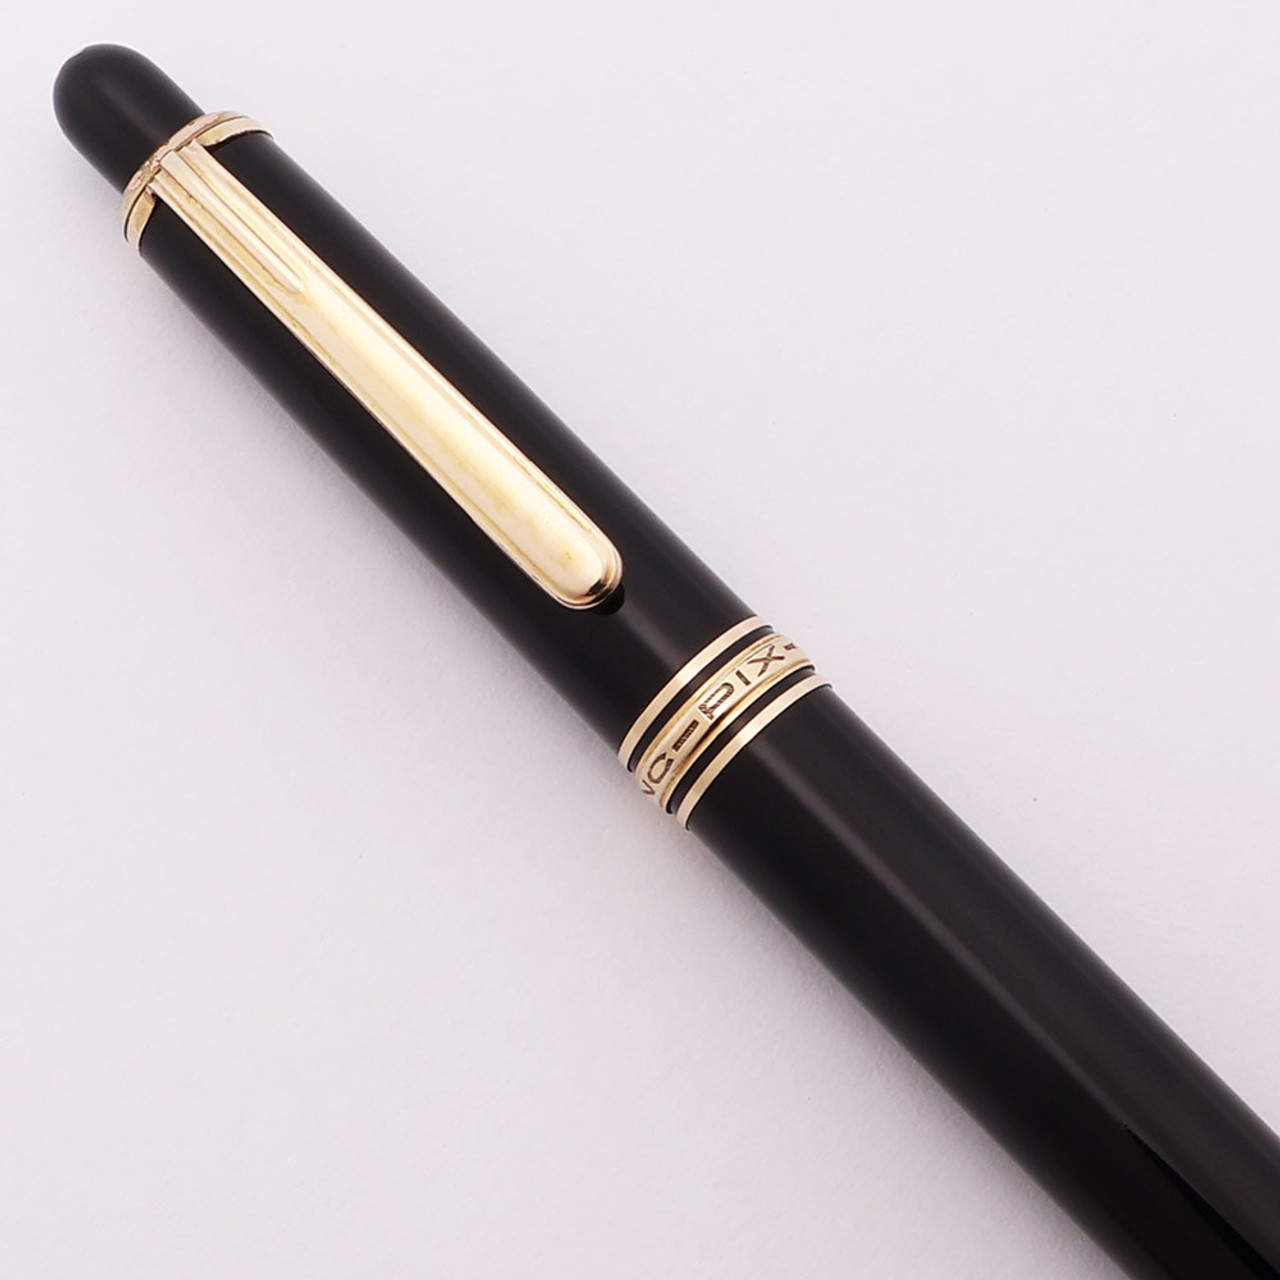 Montblanc Pix 172 Mechanical Pencil - Black with Gold Trim (Excellent, Works Well)